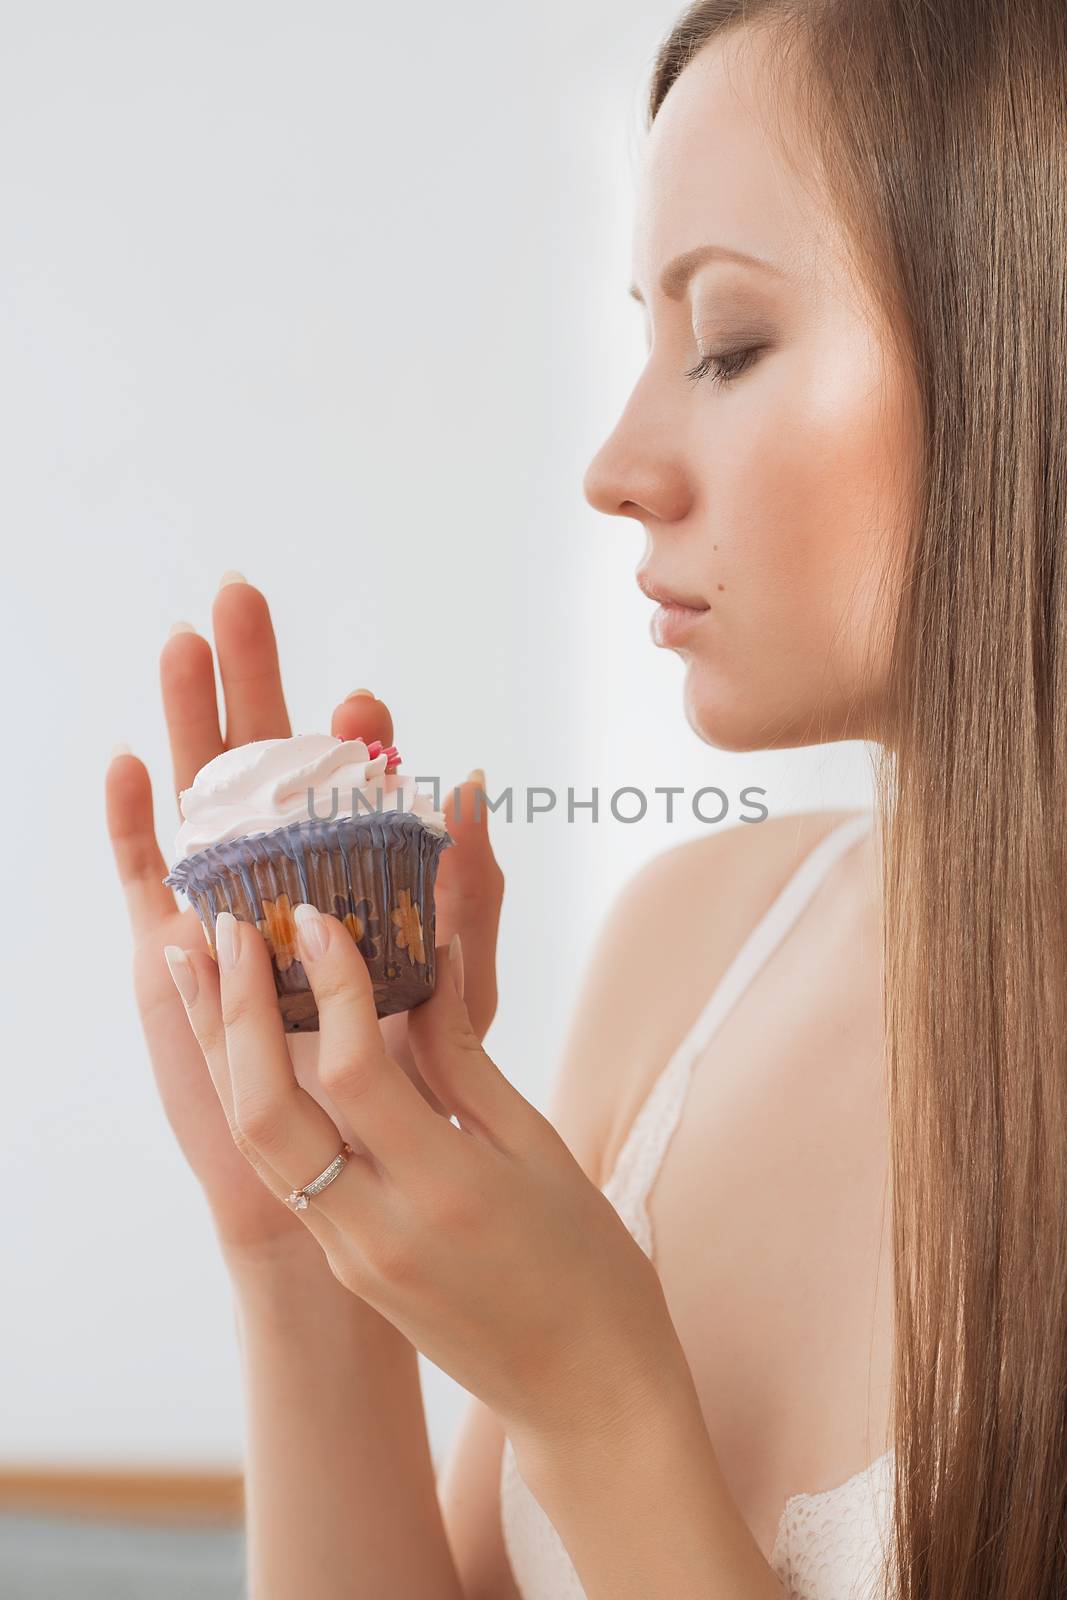 Woman wants to eat a cupcake.